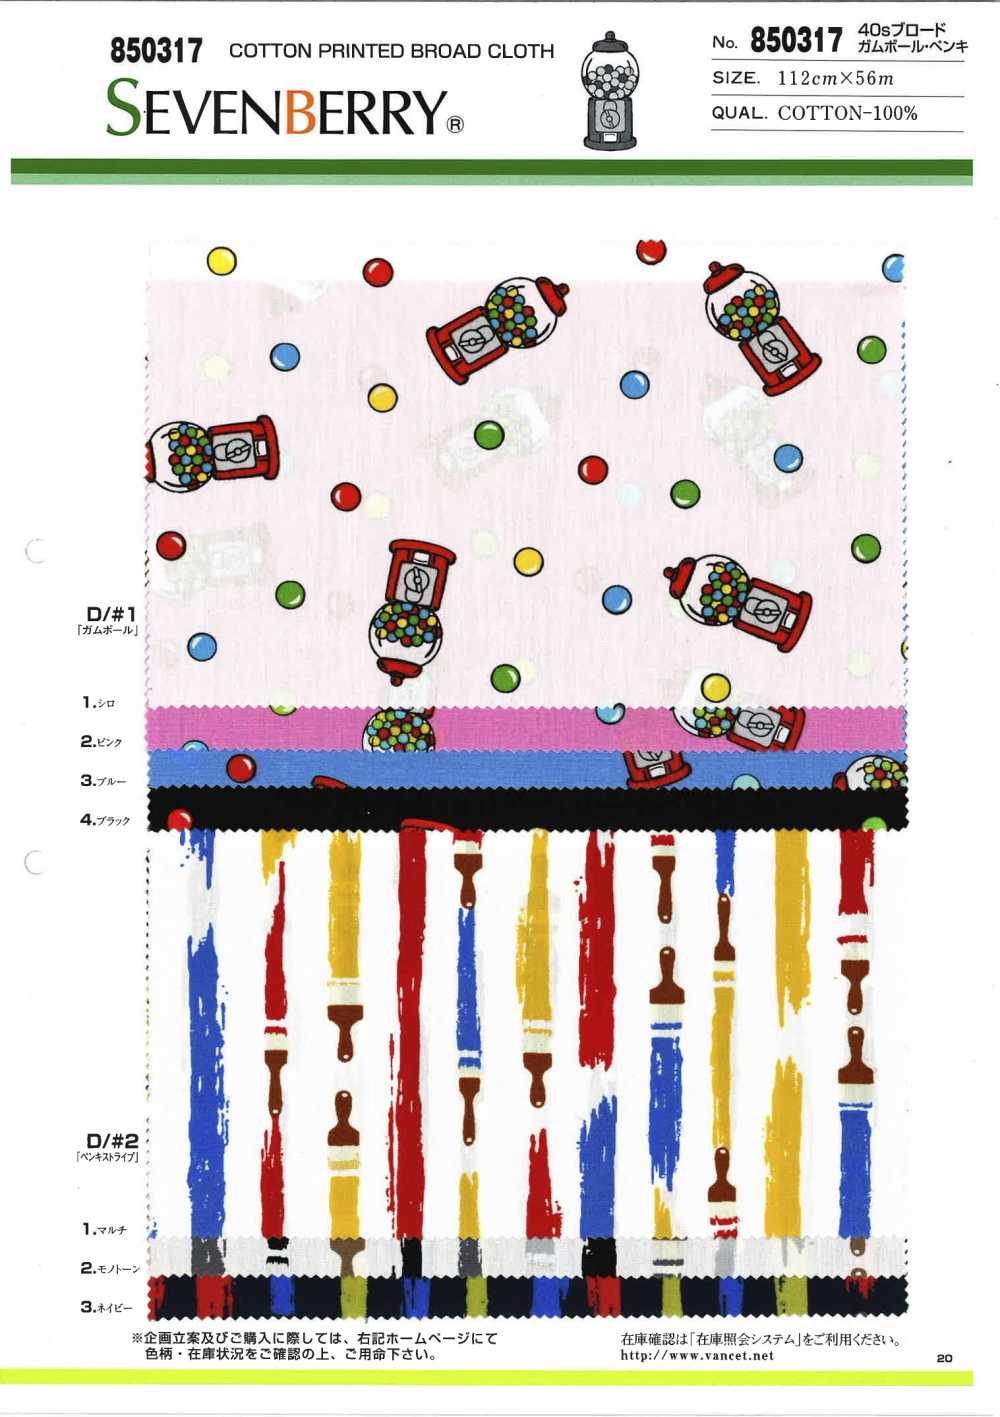 850317 40s Broadcloth Gumball Paint[Textile / Fabric] VANCET